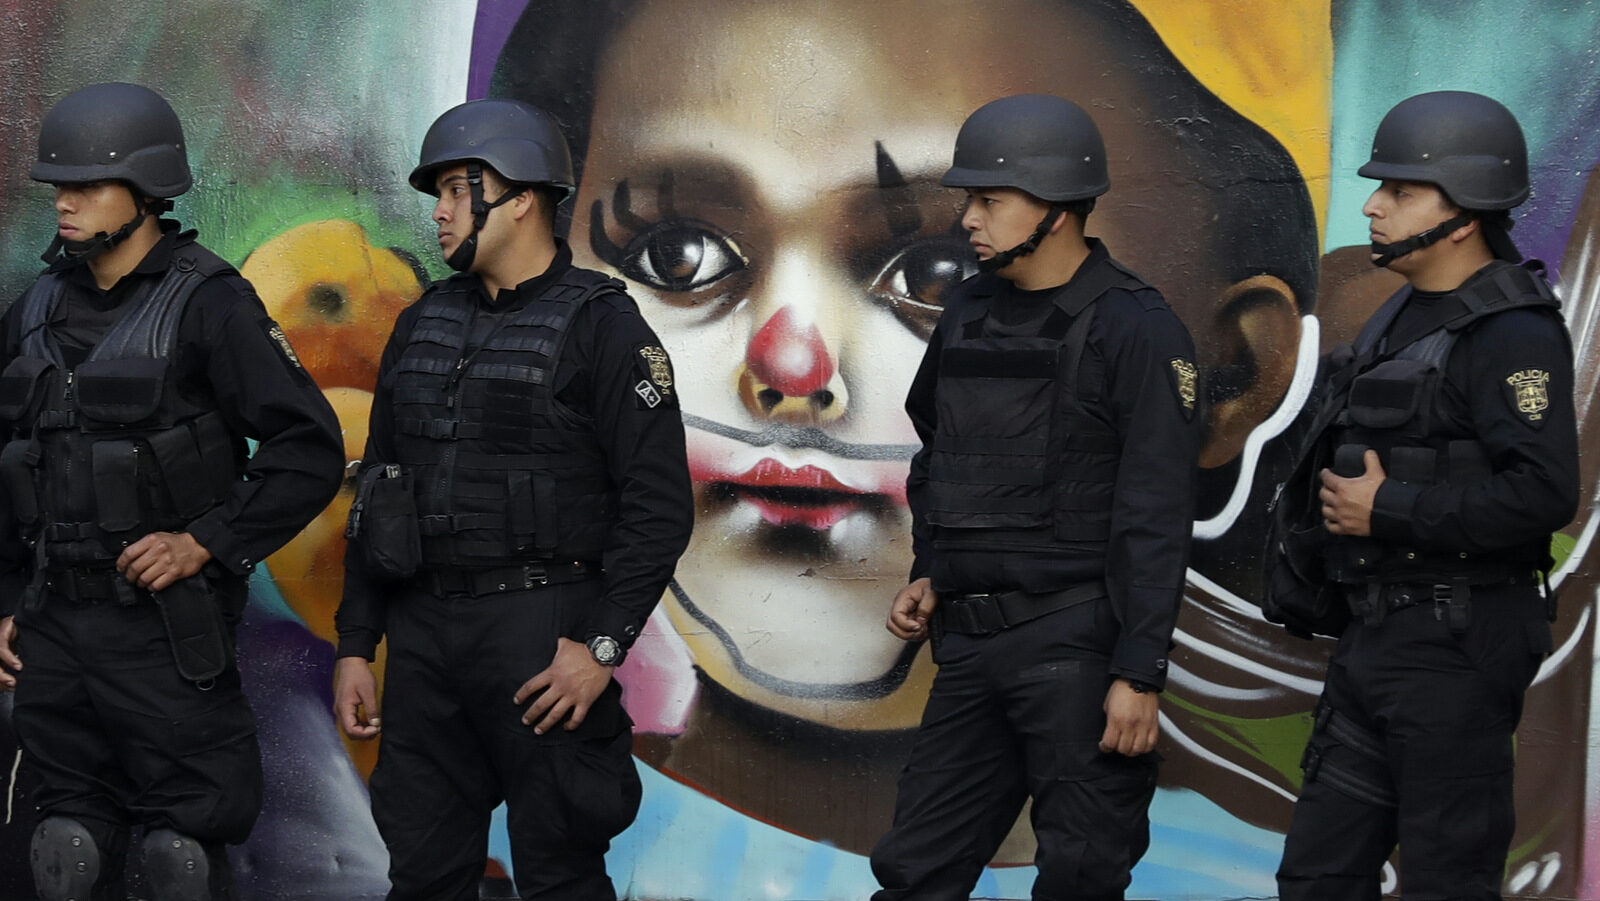 Police providing security walk in front of street art as thousands marched in anger against the government of Enrique Pena Nieto following a 20 percent rise in gas prices, in Mexico City, Monday, Jan. 9, 2017. Demonstrators have been protesting across Mexico since the gasoline price hike took effect on New Year's Day, and the anger has occasionally erupted into violence, including several days of looting last week. (AP/Rebecca Blackwell)